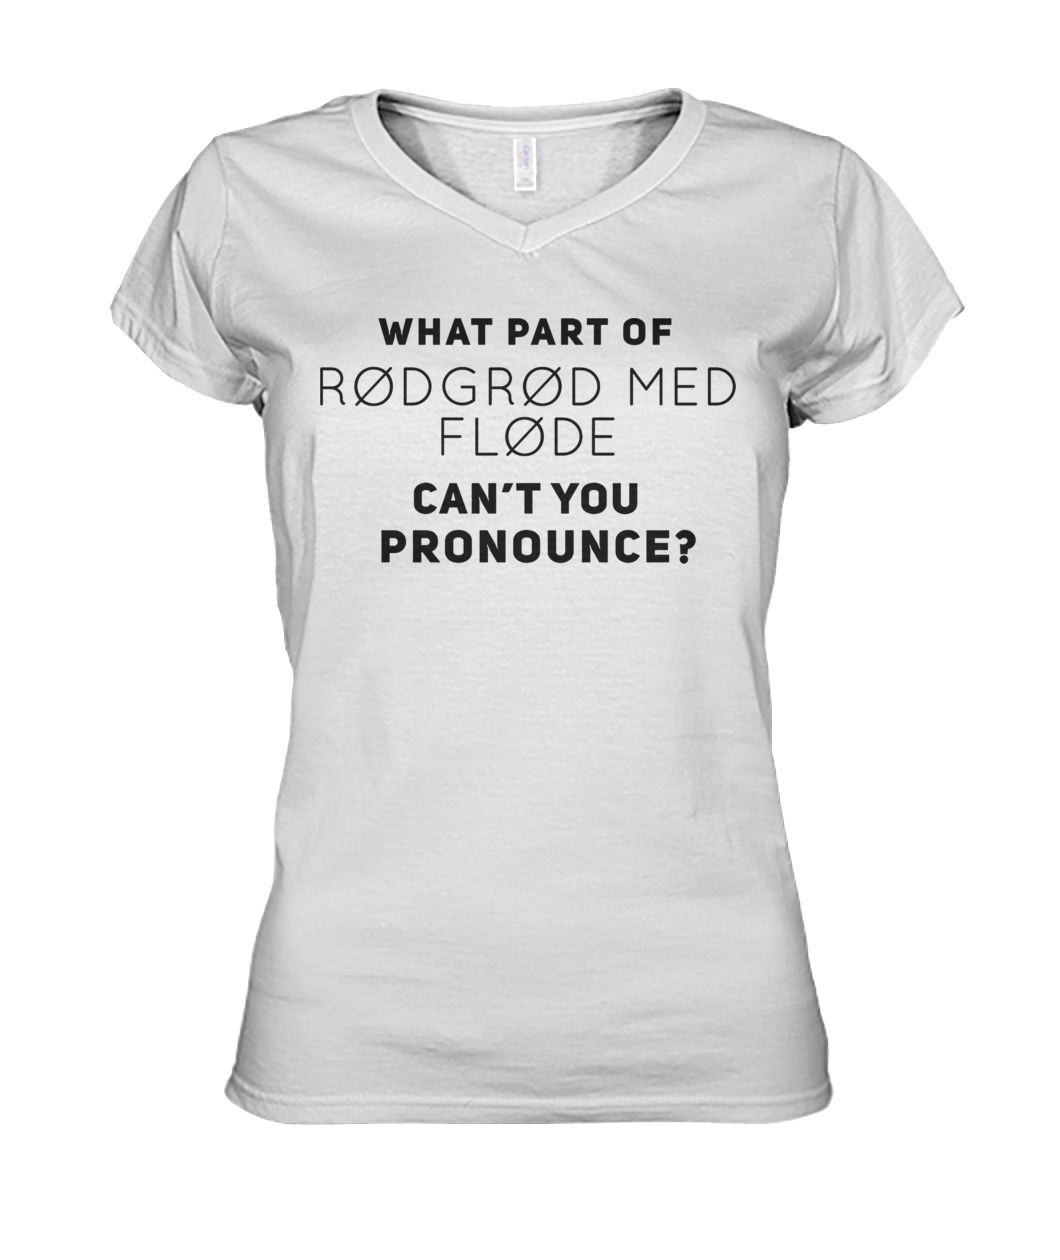 What part of rodgrod med flode can't you pronounce women's v-neck